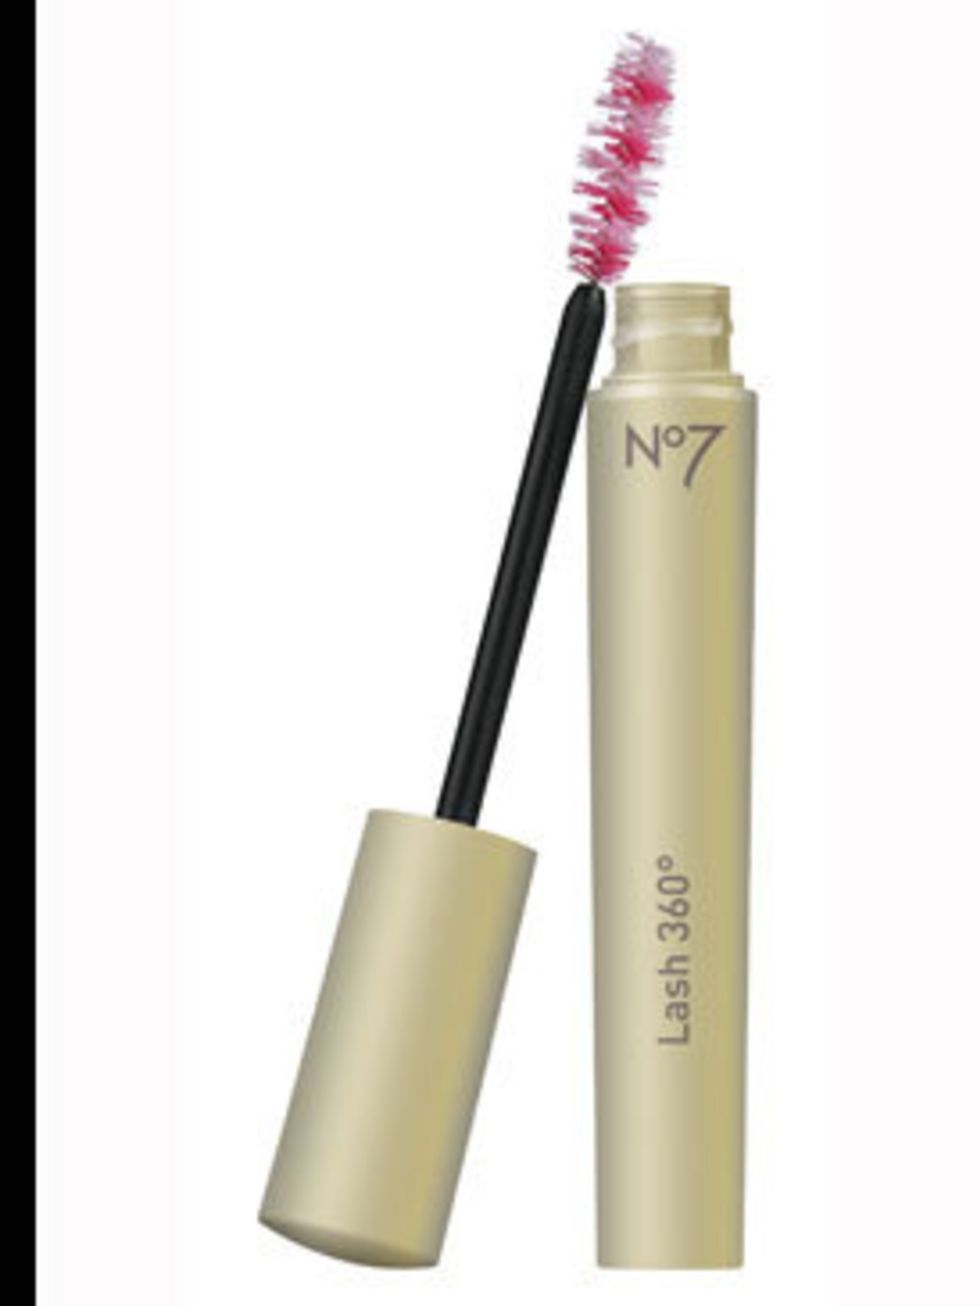 <p>Lash 360 mascara, £11 from No 7 at Boots. 10% goes to Breast Cancer Care.</p>